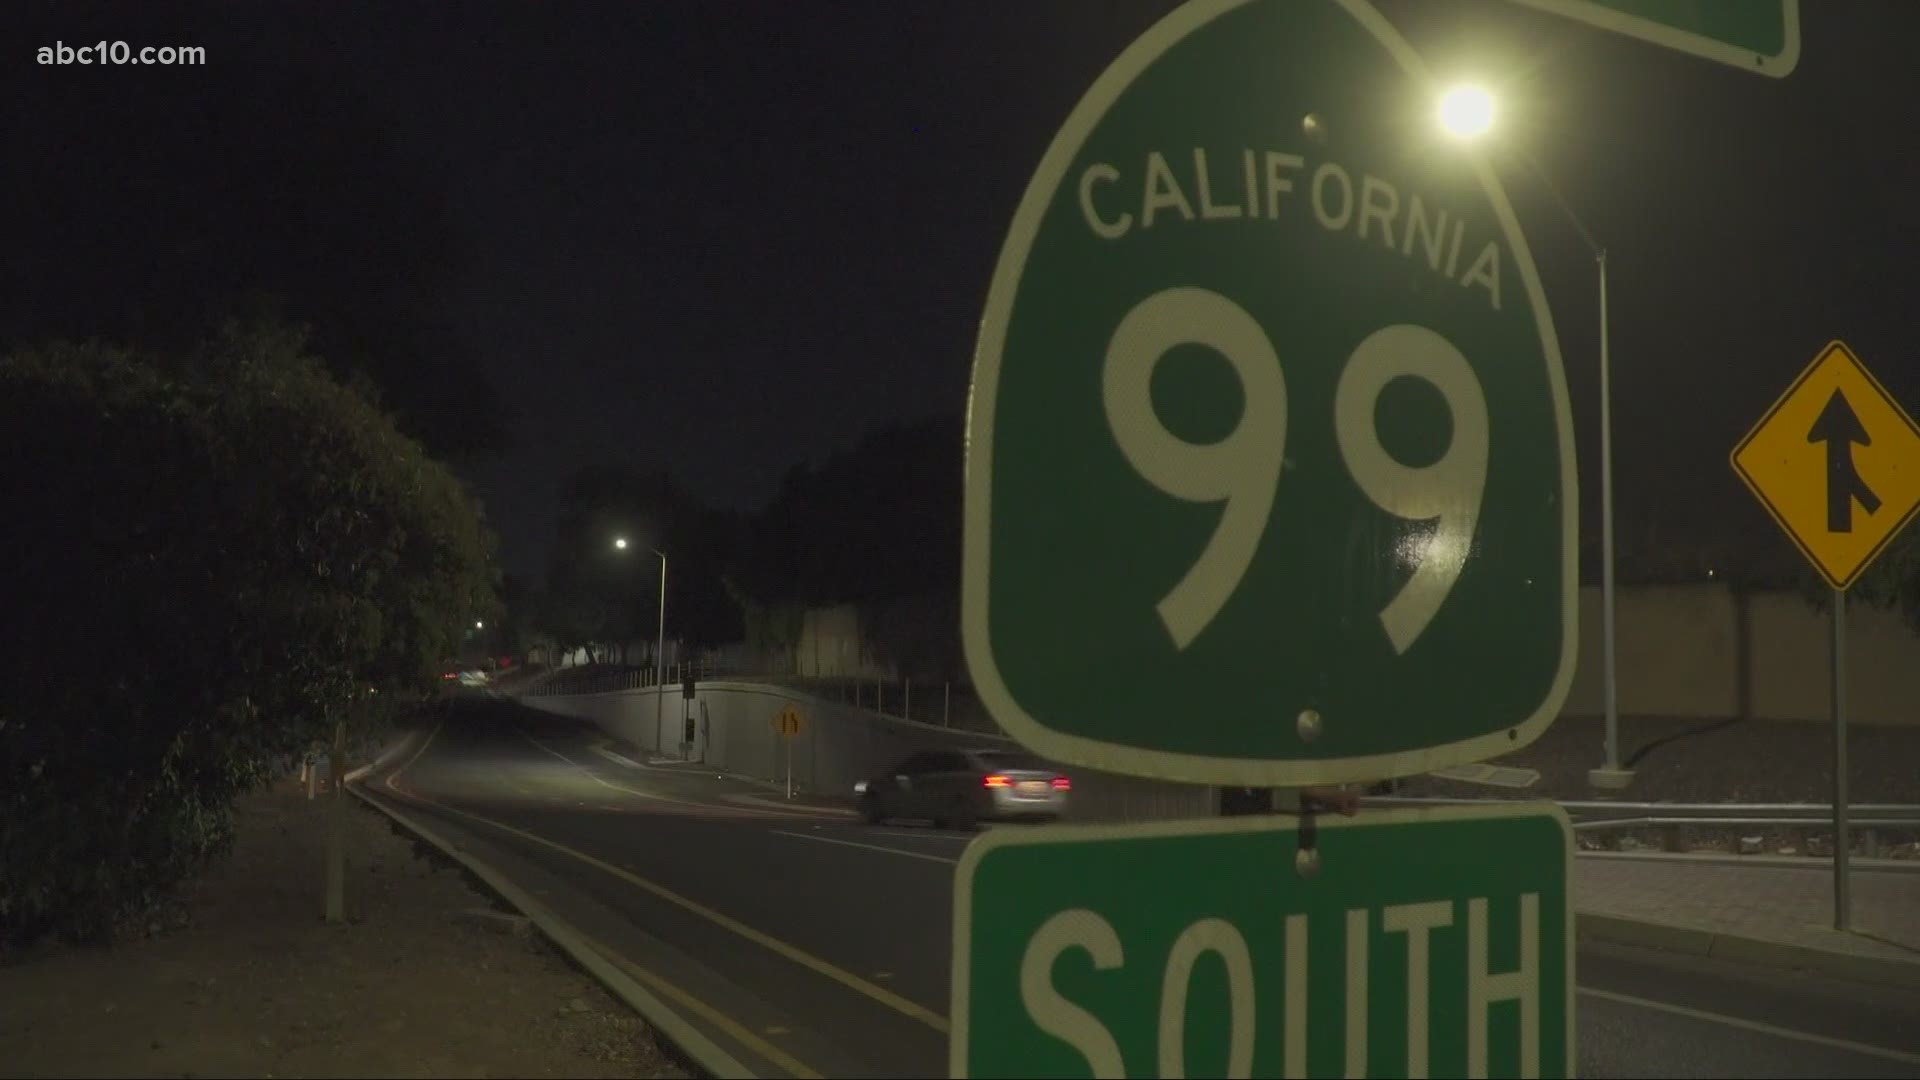 "Probably one of the biggest closures that we’ve had in the department and in the Sacramento region," a Caltrans spokesperson previously told ABC10.